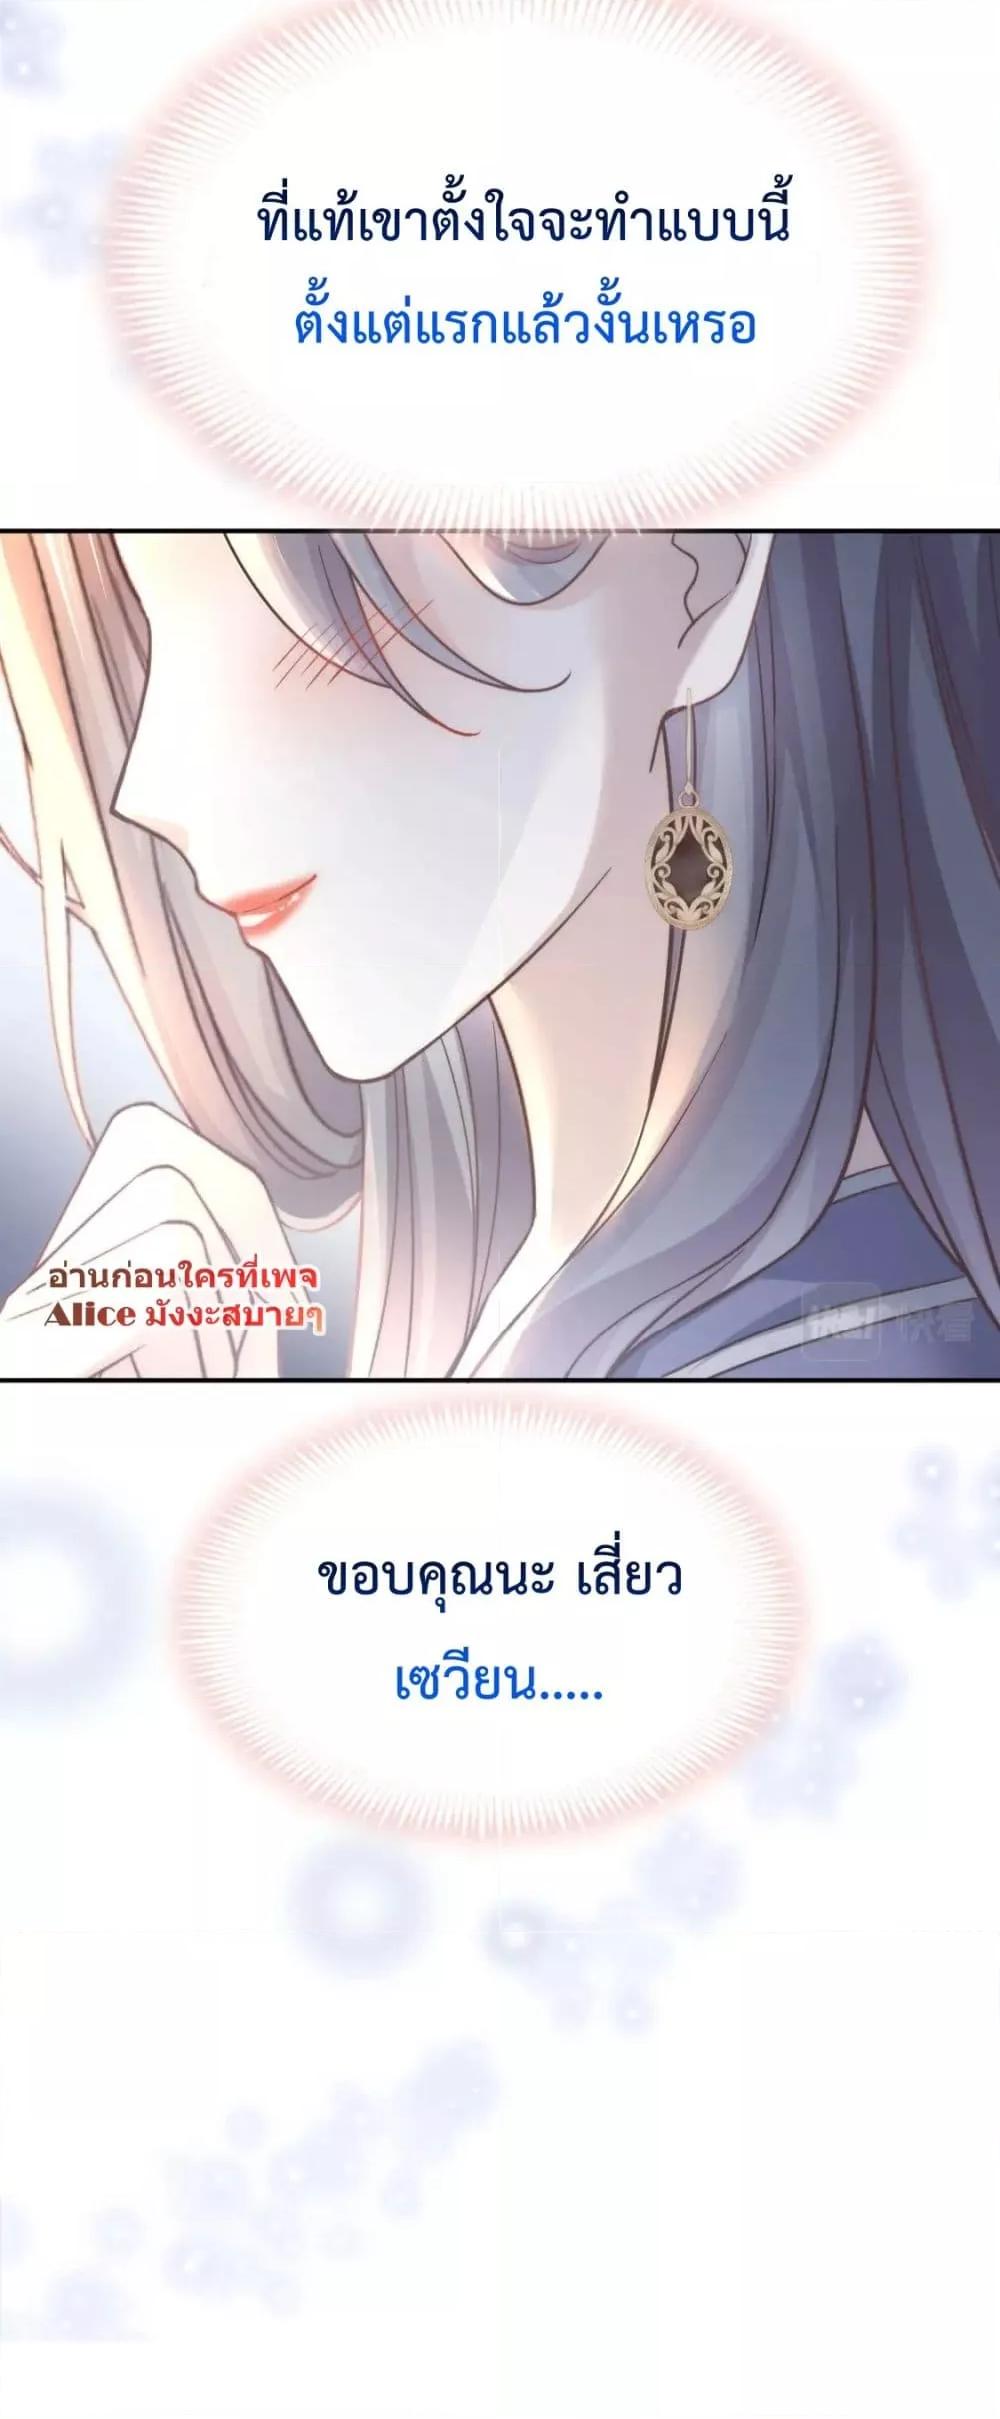 Ding Fleeting Years has planned for me for a long time – ไอดอลสุดตอนที่ 17 (21)